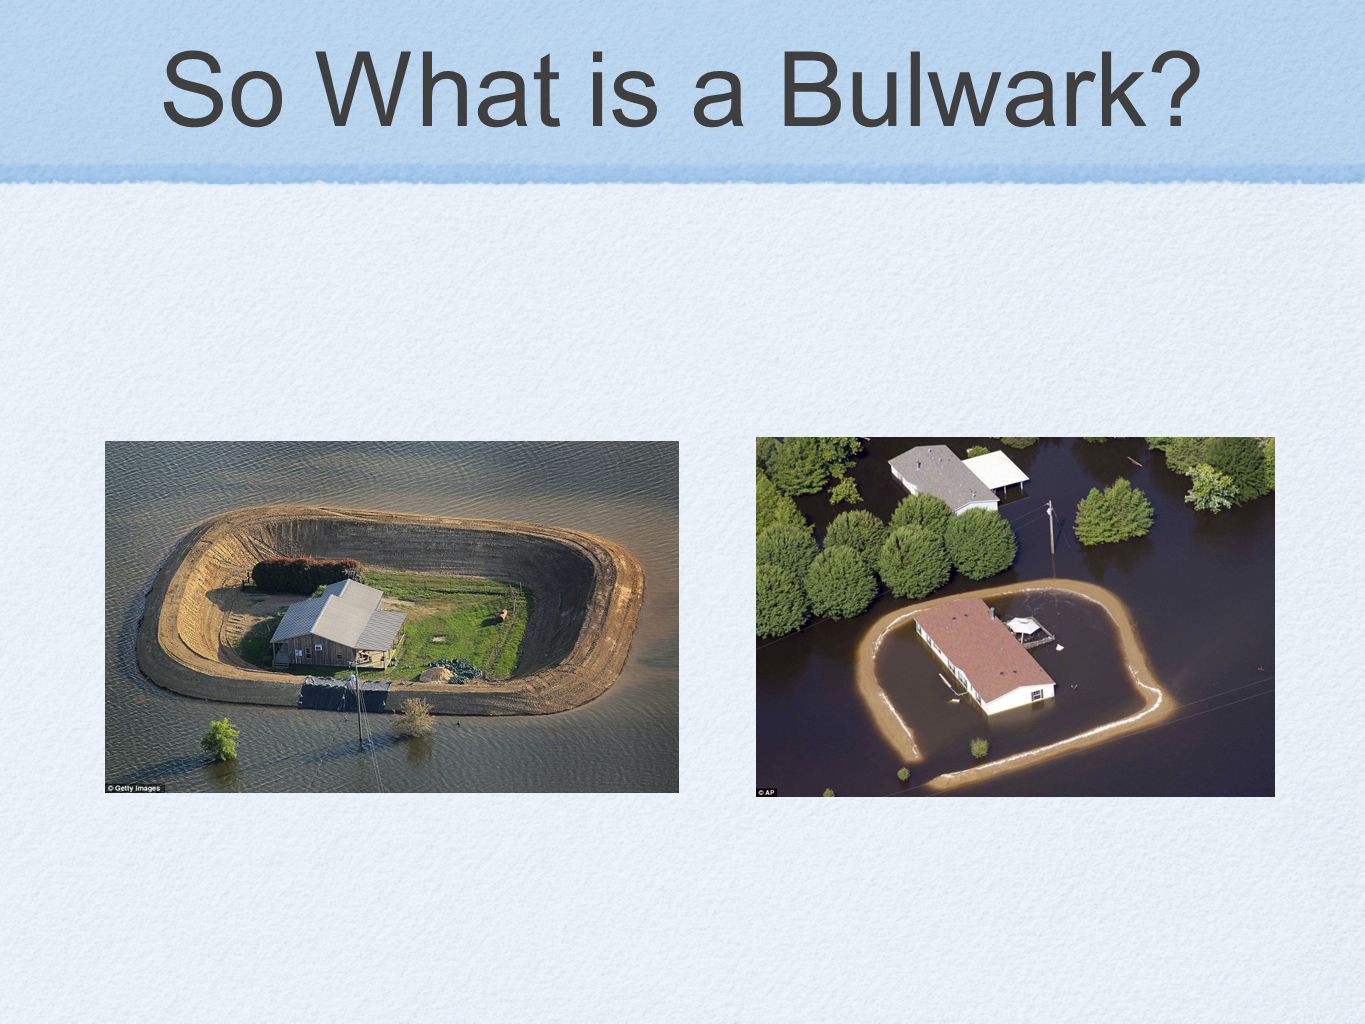 So What is a Bulwark